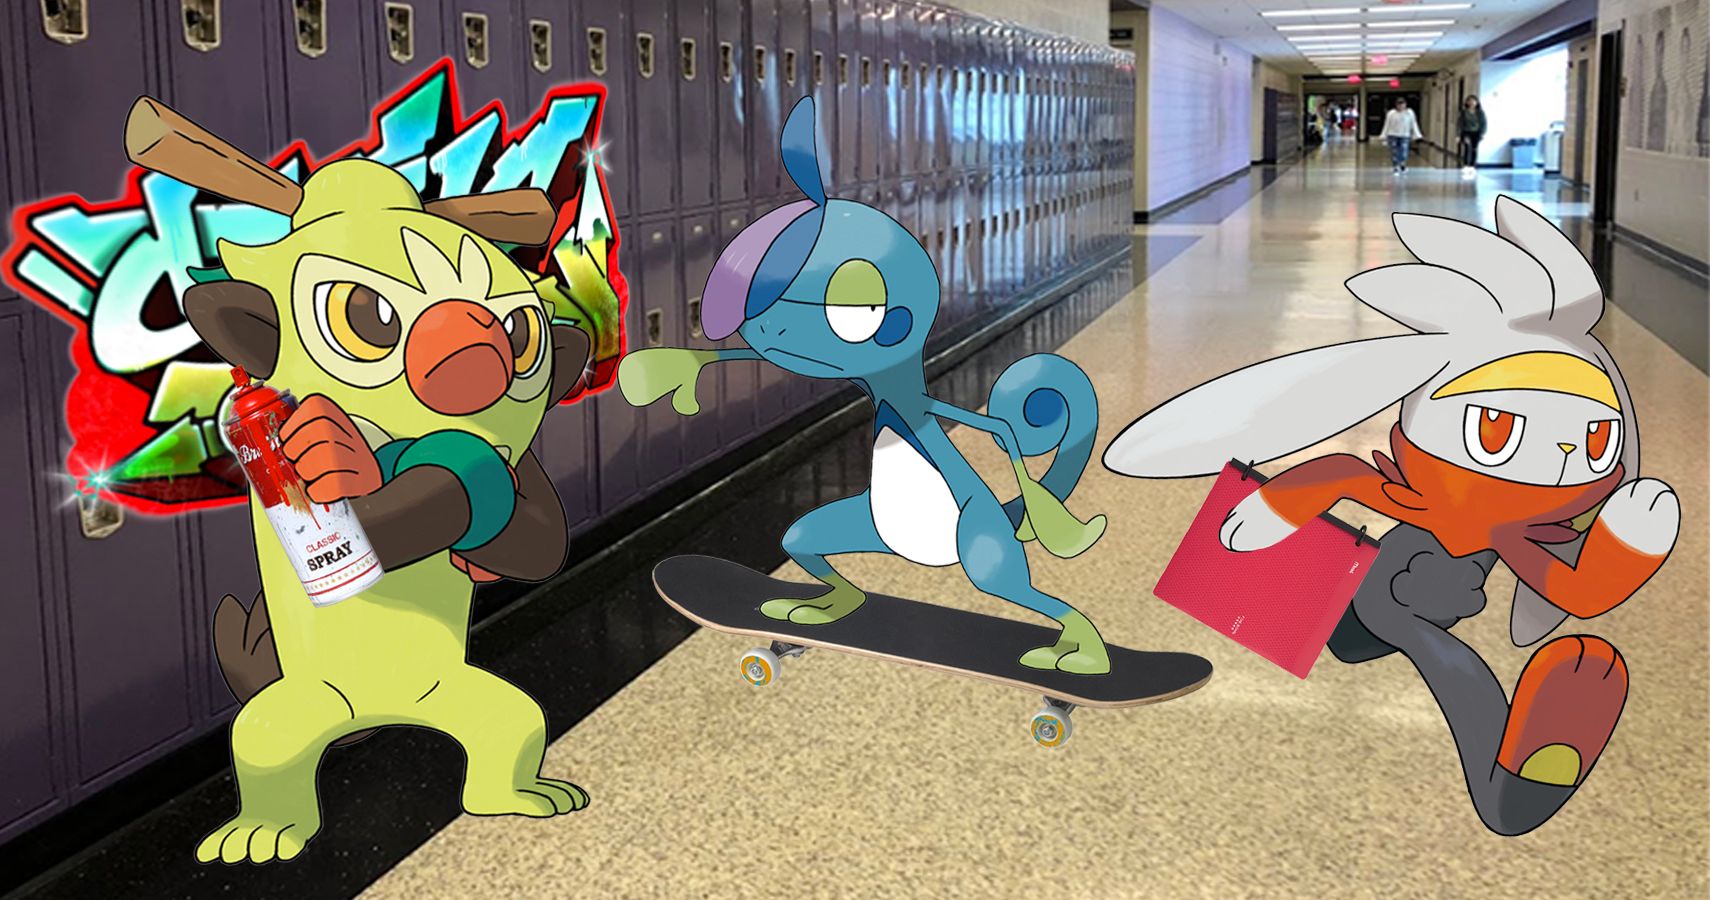 The Newer Pokemon Starter Middle Evolutions Are All Awkward Teens And We Need To Talk About It